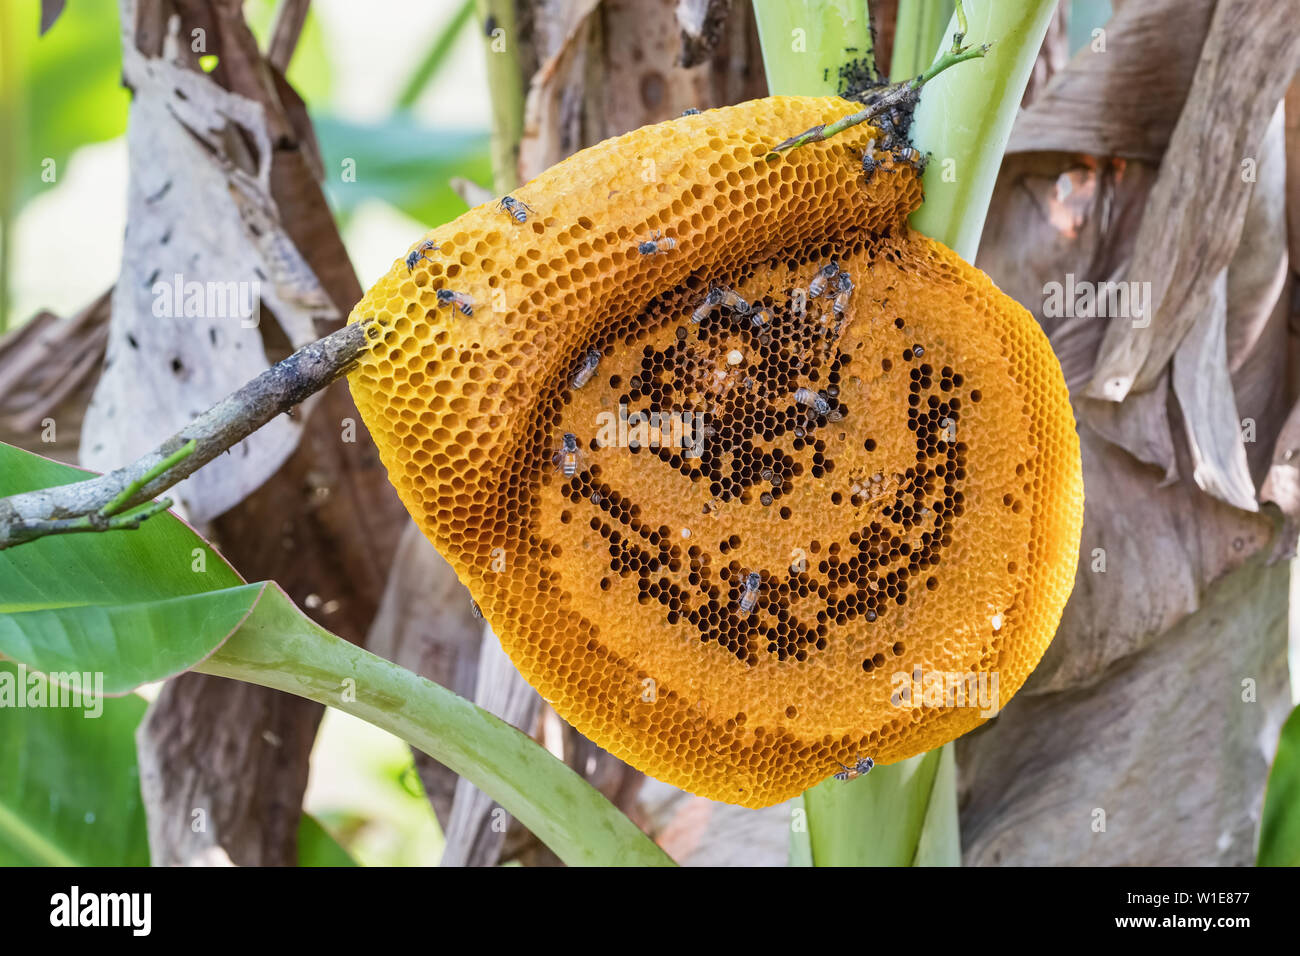 Wild bees honeycomb on a tree in Thailand Stock Photo